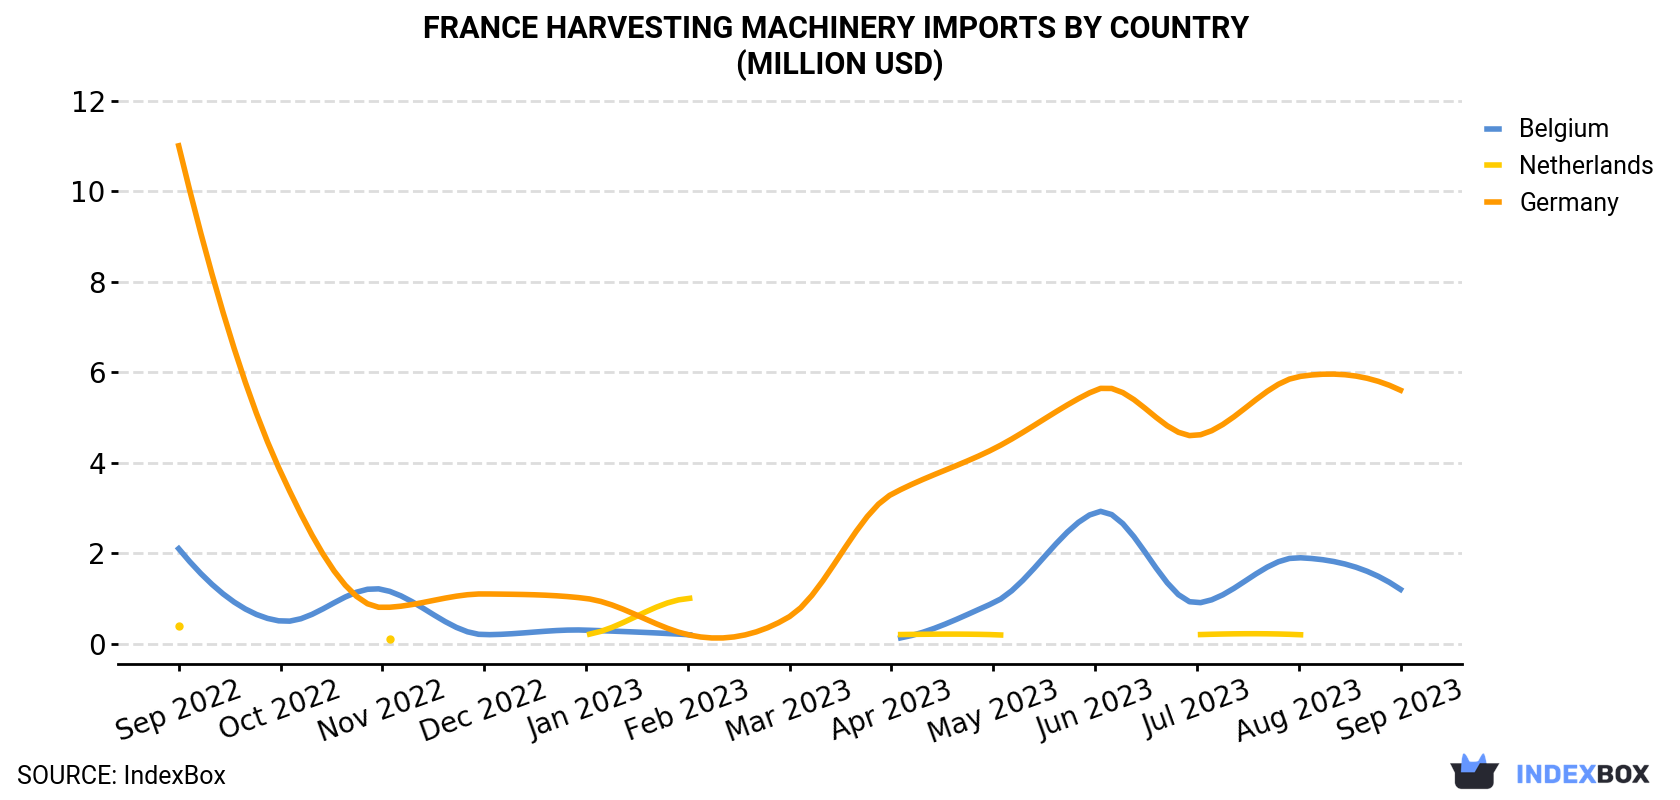 France Harvesting Machinery Imports By Country (Million USD)